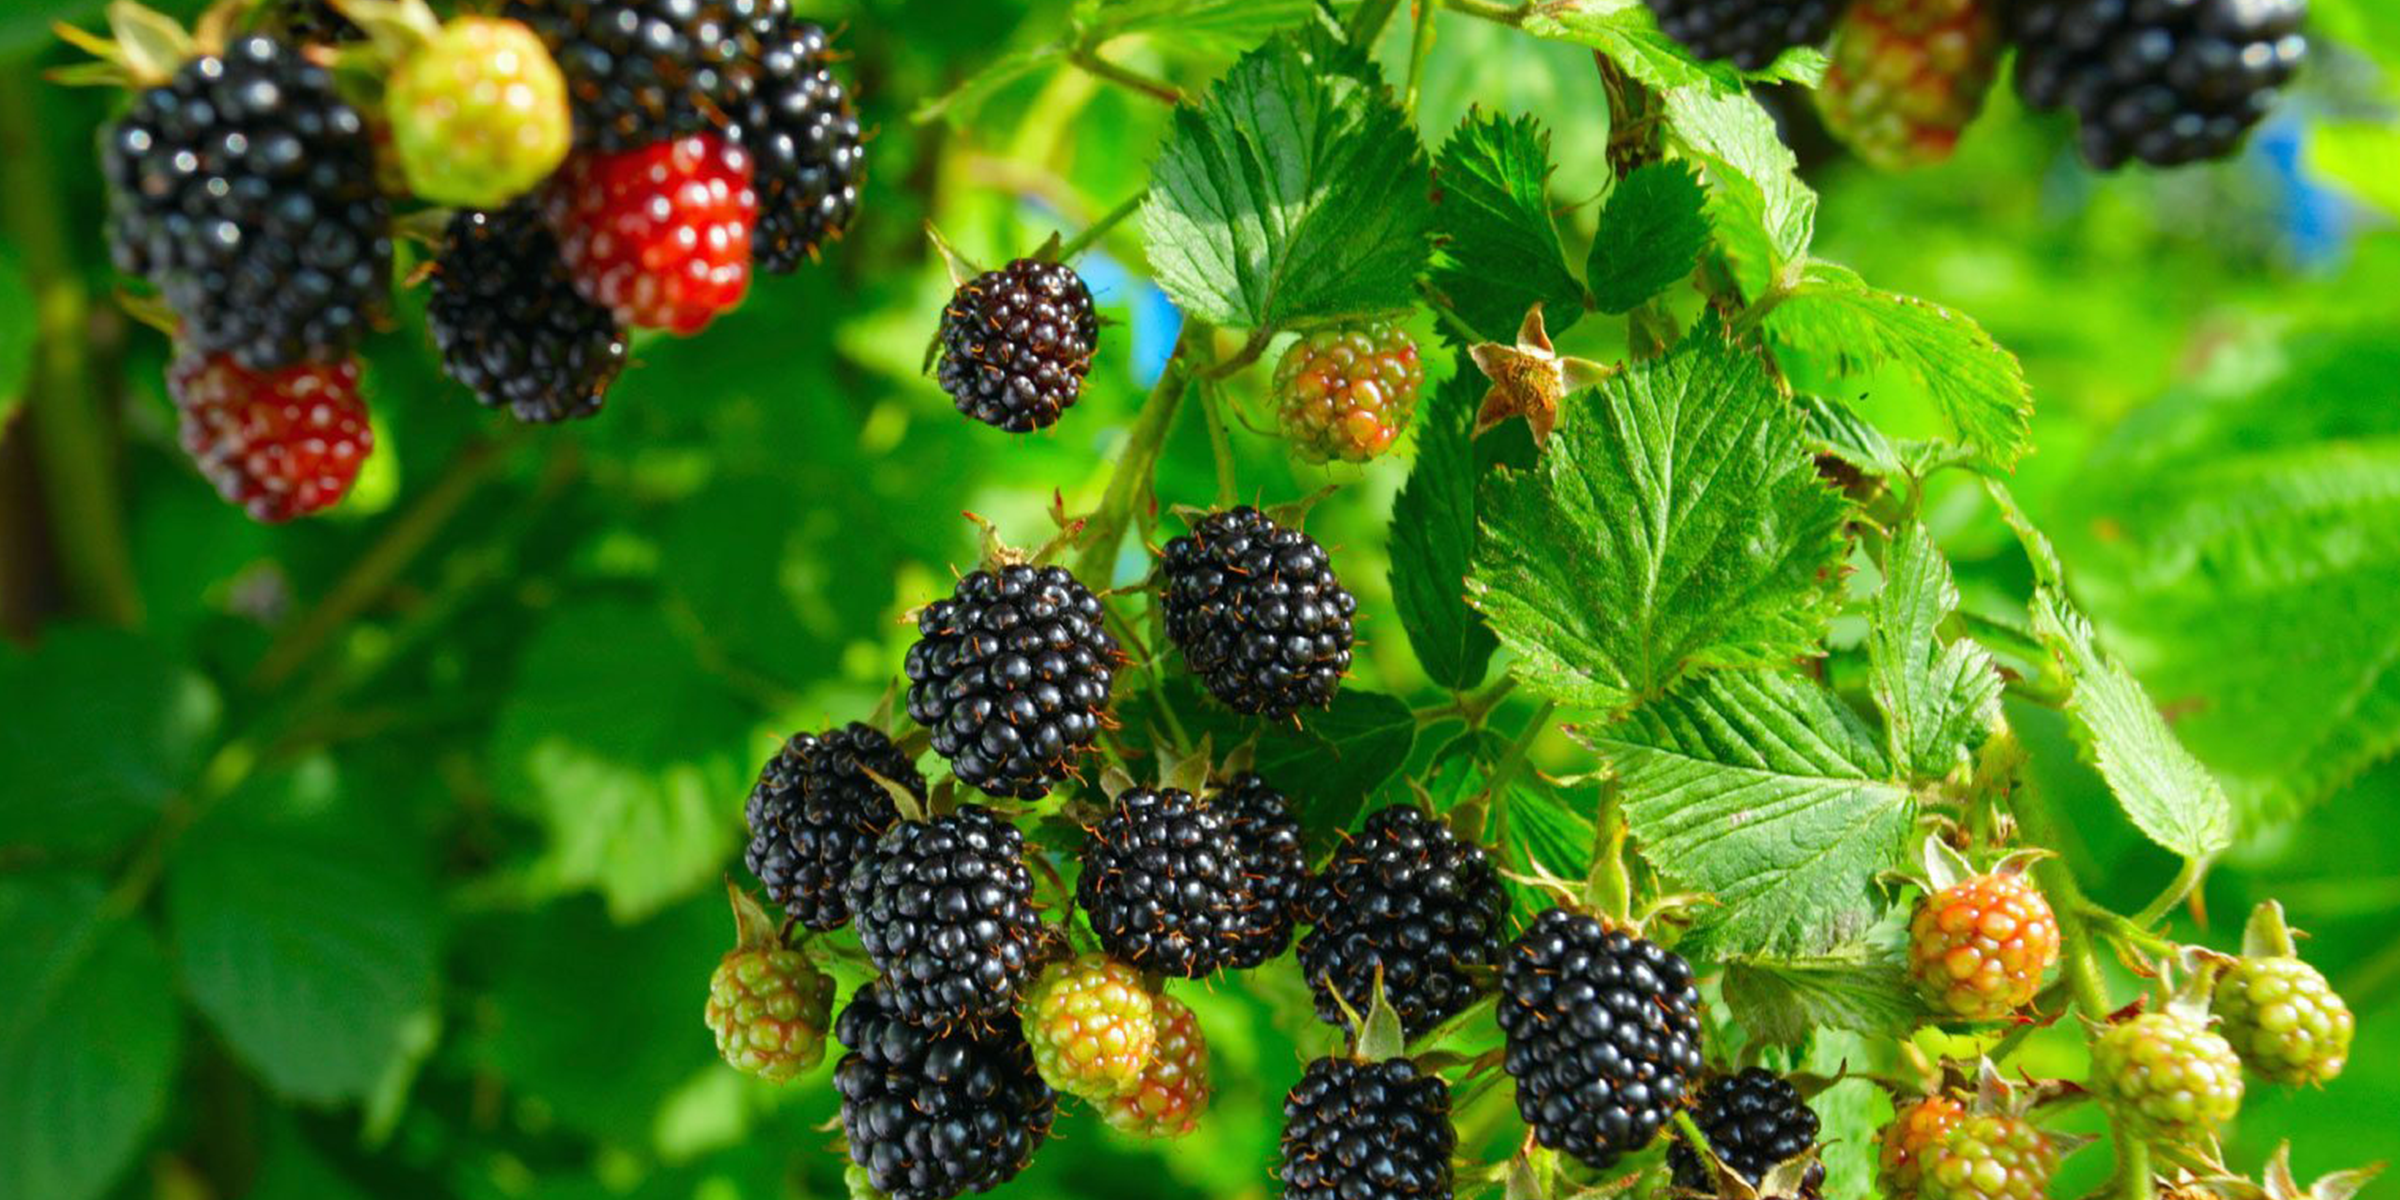 Blackberry used to improve health condition